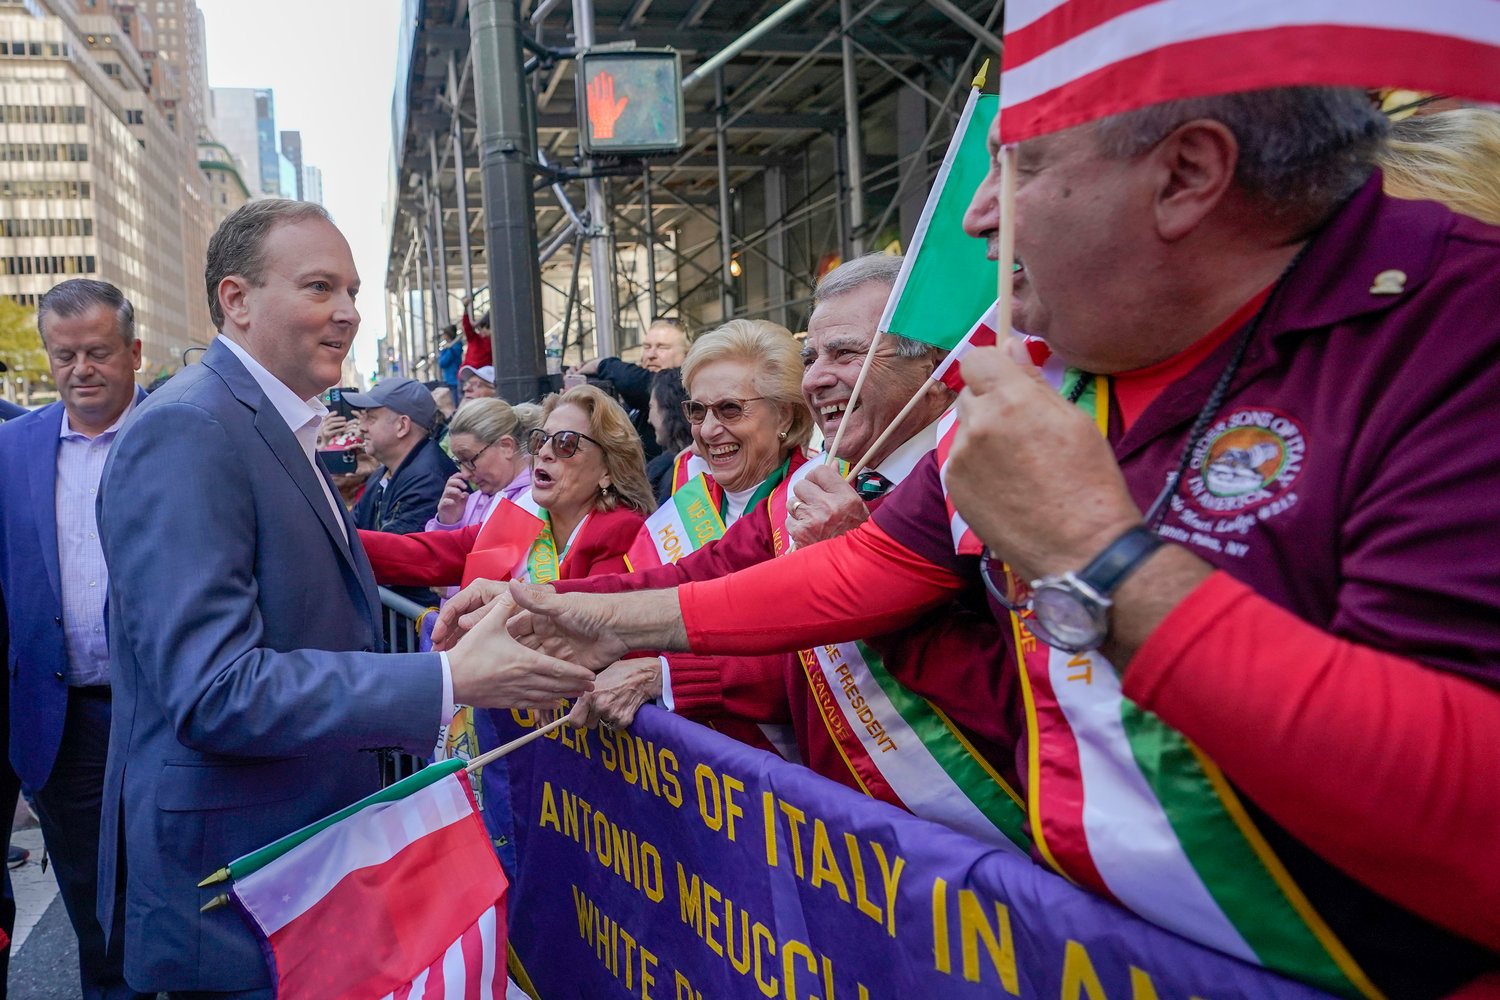 Republican candidate for New York Governor Rep. Lee Zeldin, front left, greets spectators as he marches up 5th Avenue during the annual Columbus Day Parade, Monday, Oct. 10, 2022, in New York.